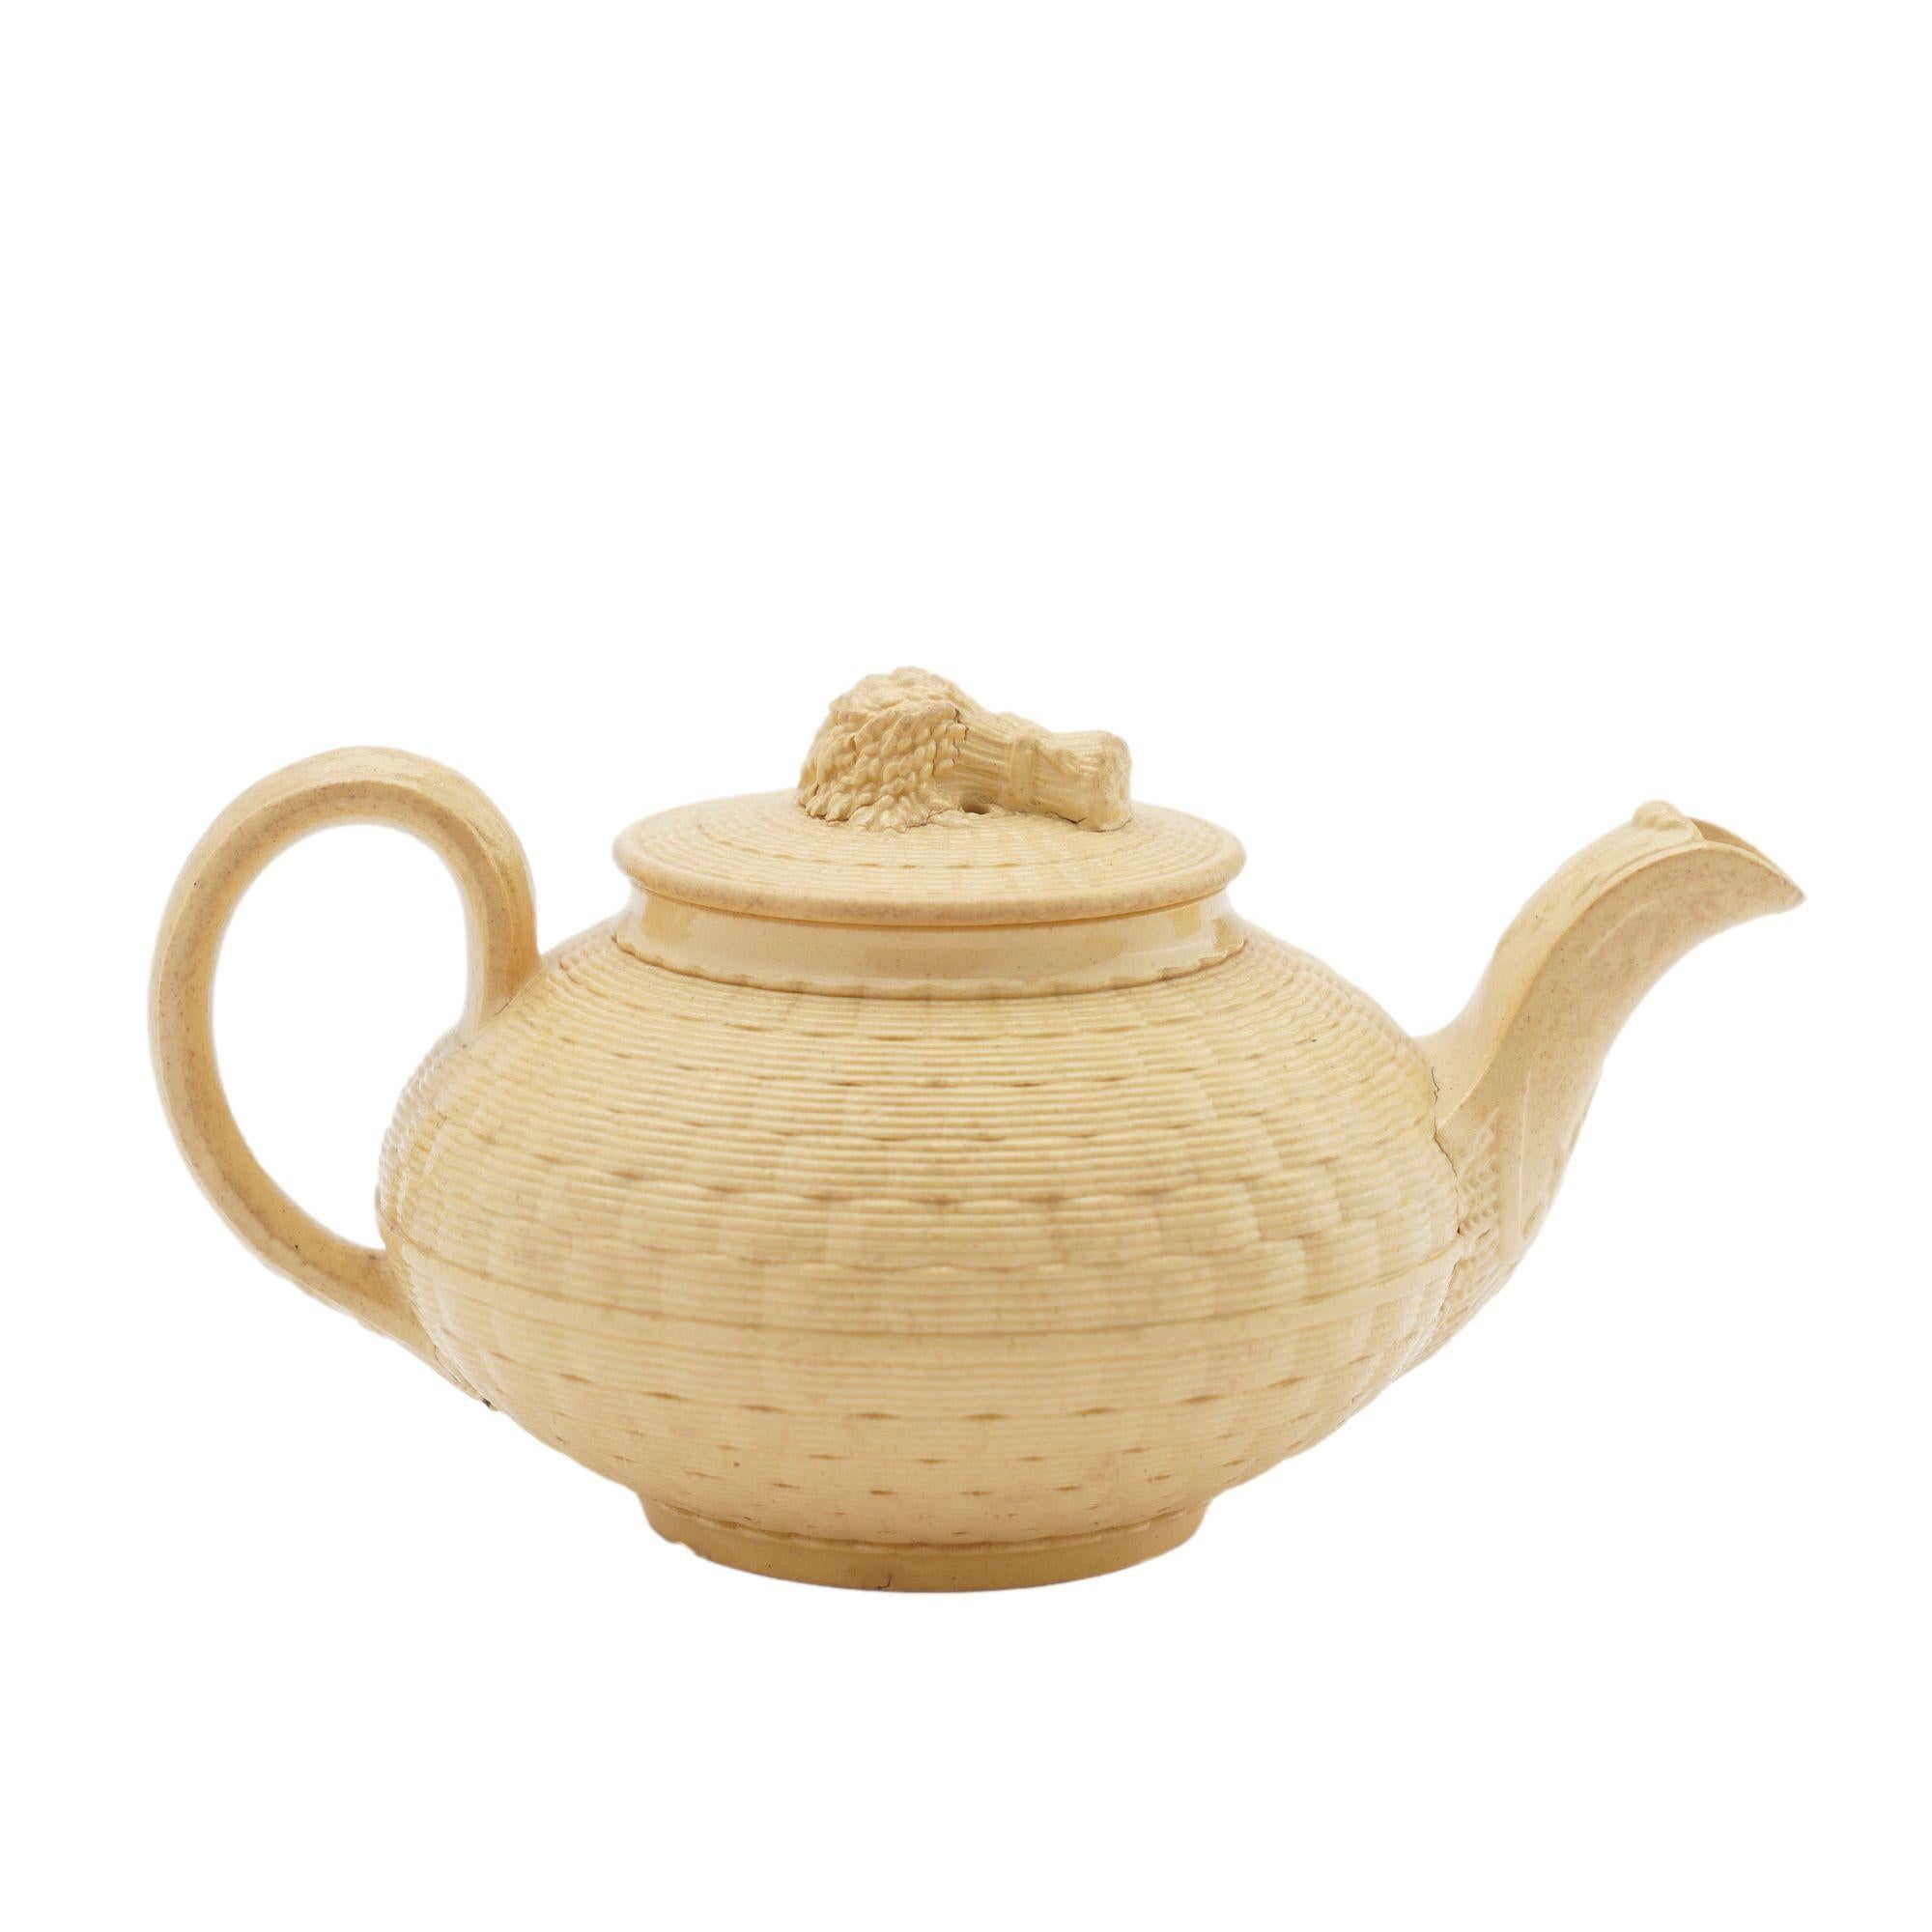 Caneware creamer and teapot by Wedgwood, c. 1817 For Sale 3